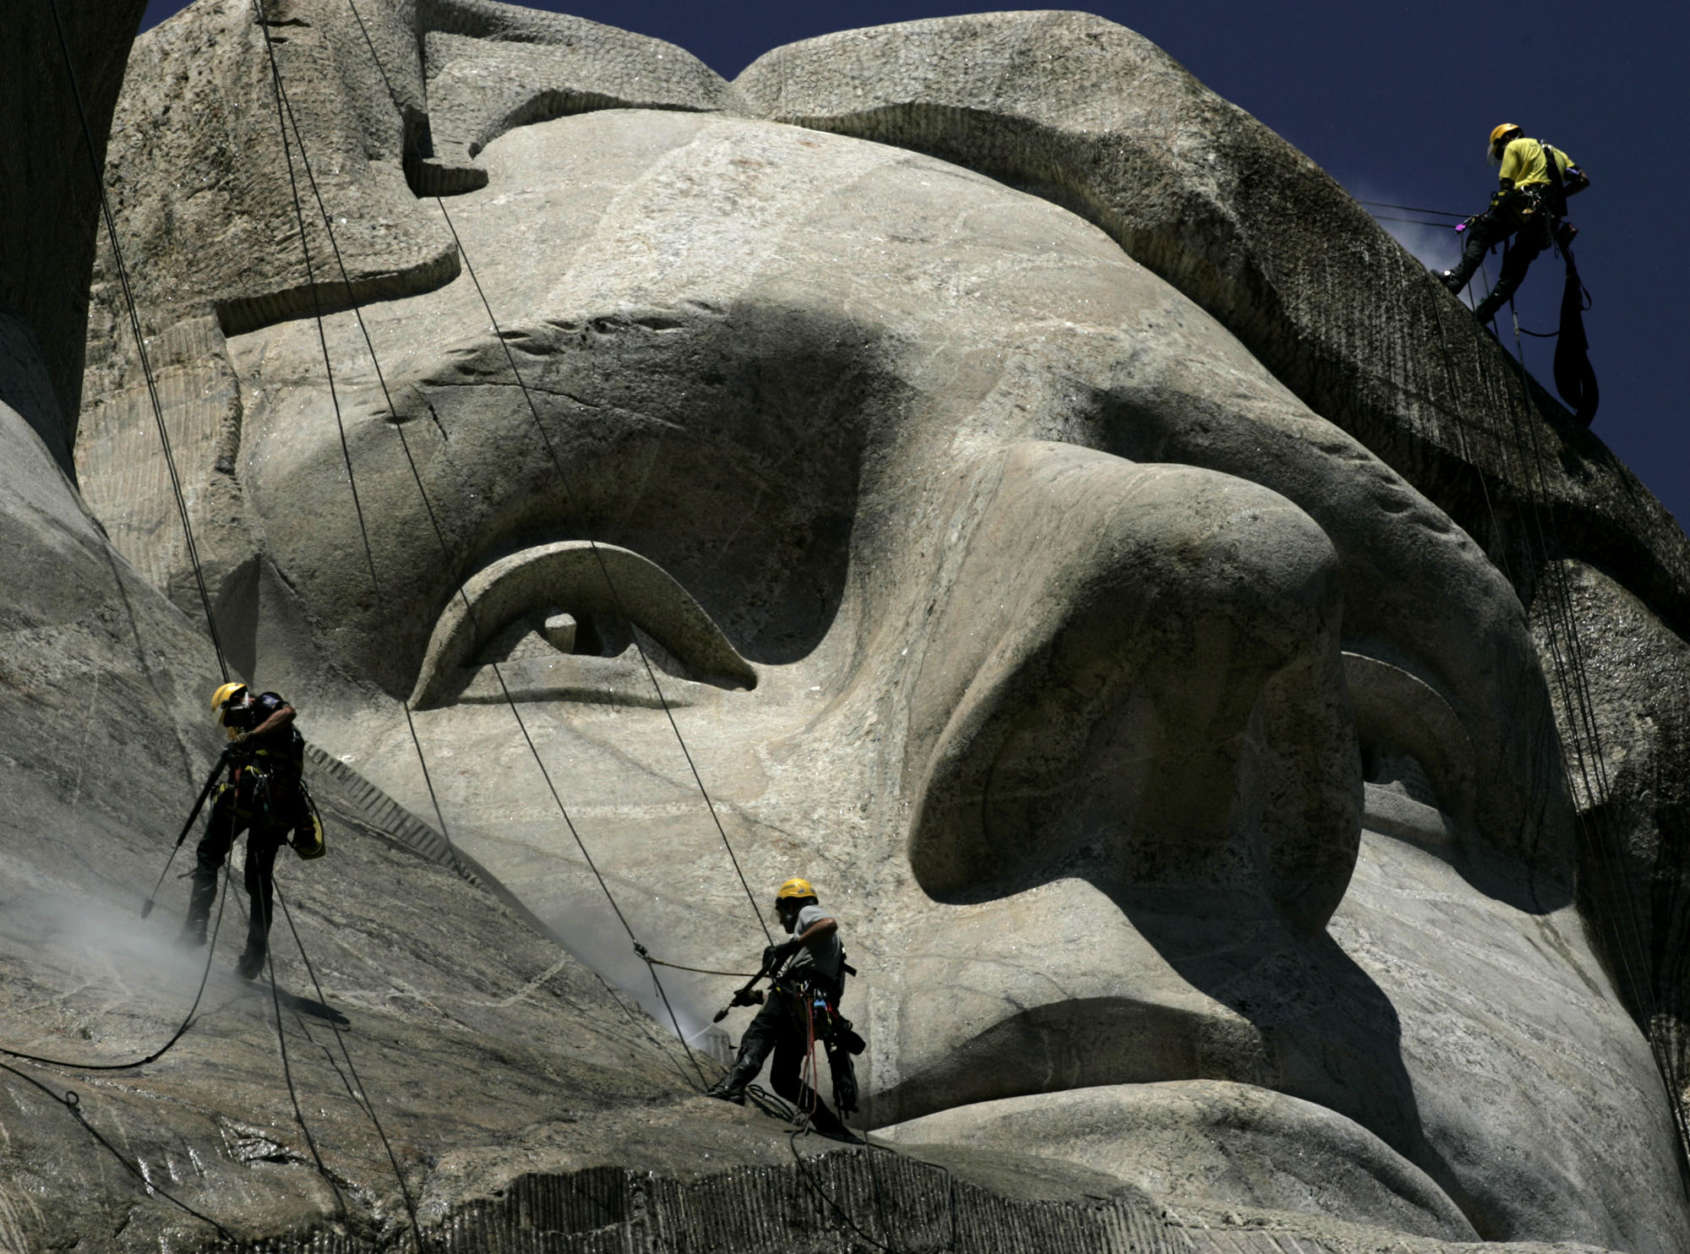 German workers Gerhard Buchar, right, and Winfried Hagenau, left, along with National Park Service employee Darin Oestman use pressure washers to clean around the face of Thomas Jefferson July 22, 2005, at Mount Rushmore National Memorial in South Dakota. The workers are taking part in a project to clean dirt and a fungus called lichen from the monument. The granite sculptures hadn't been washed since they were completed 65 years ago by sculptor Gutzon Borglum.  (AP Photo/Charlie Riedel)